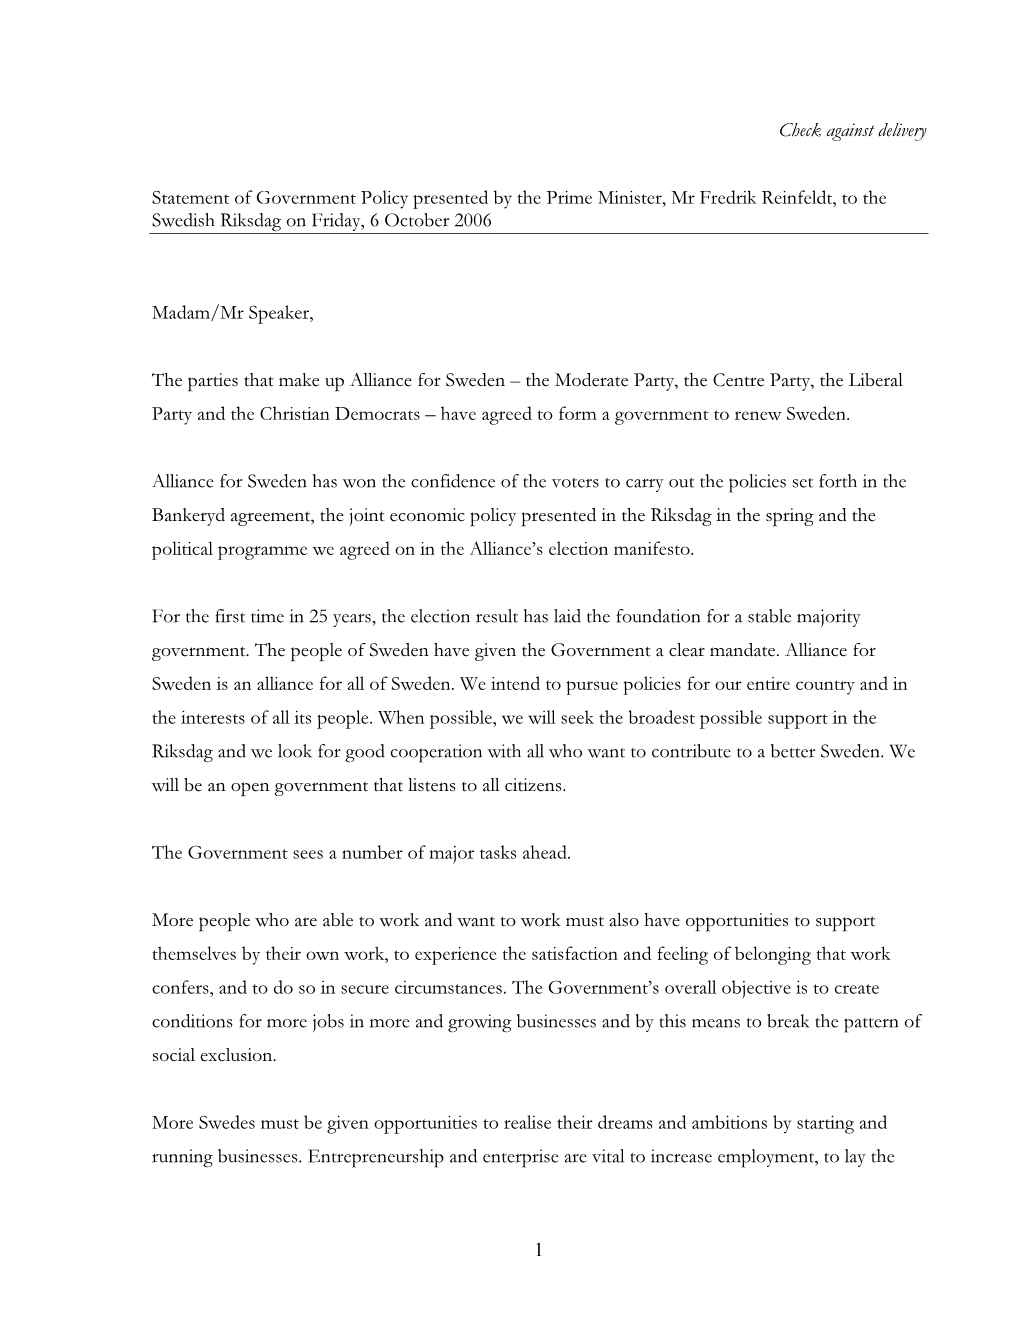 Statement of Government Policy 6 October 2006